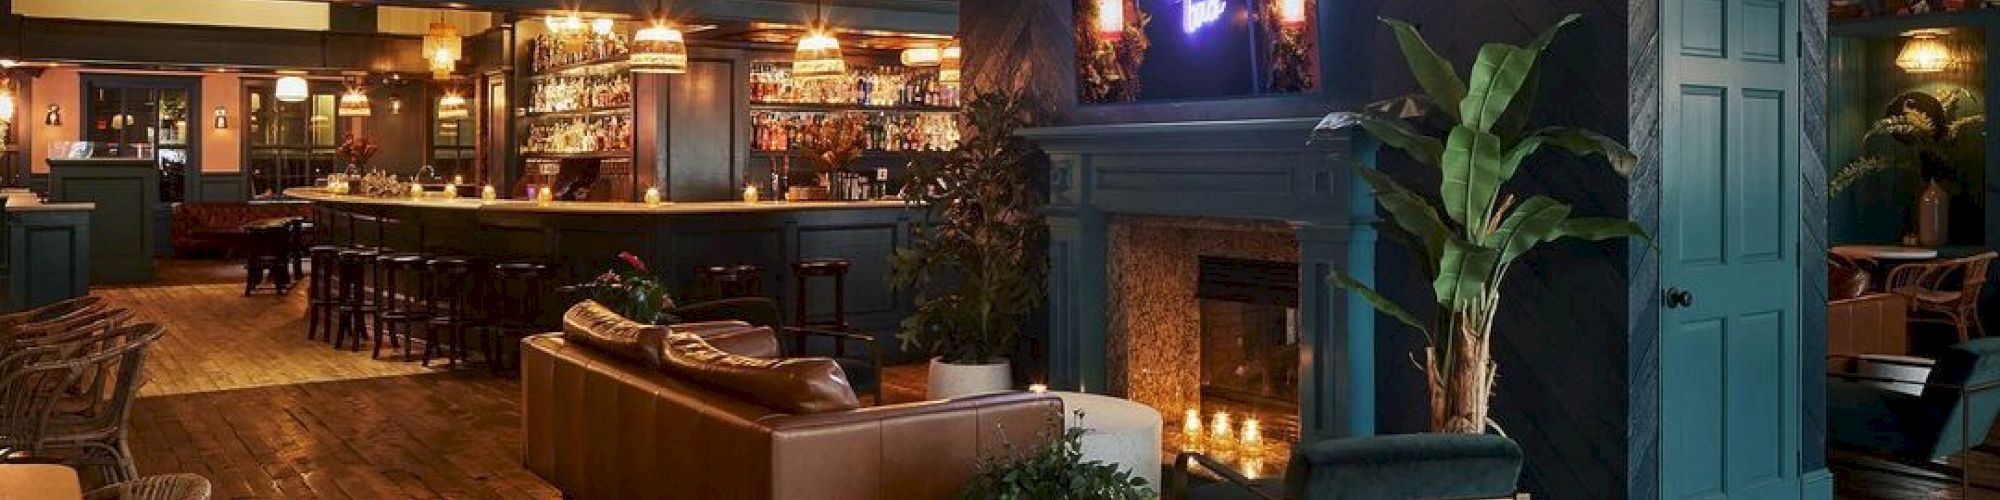 The image shows a cozy, modern bar with wooden floors, a fireplace, a bar area, and lounge seating, featuring warm lighting and contemporary decor.